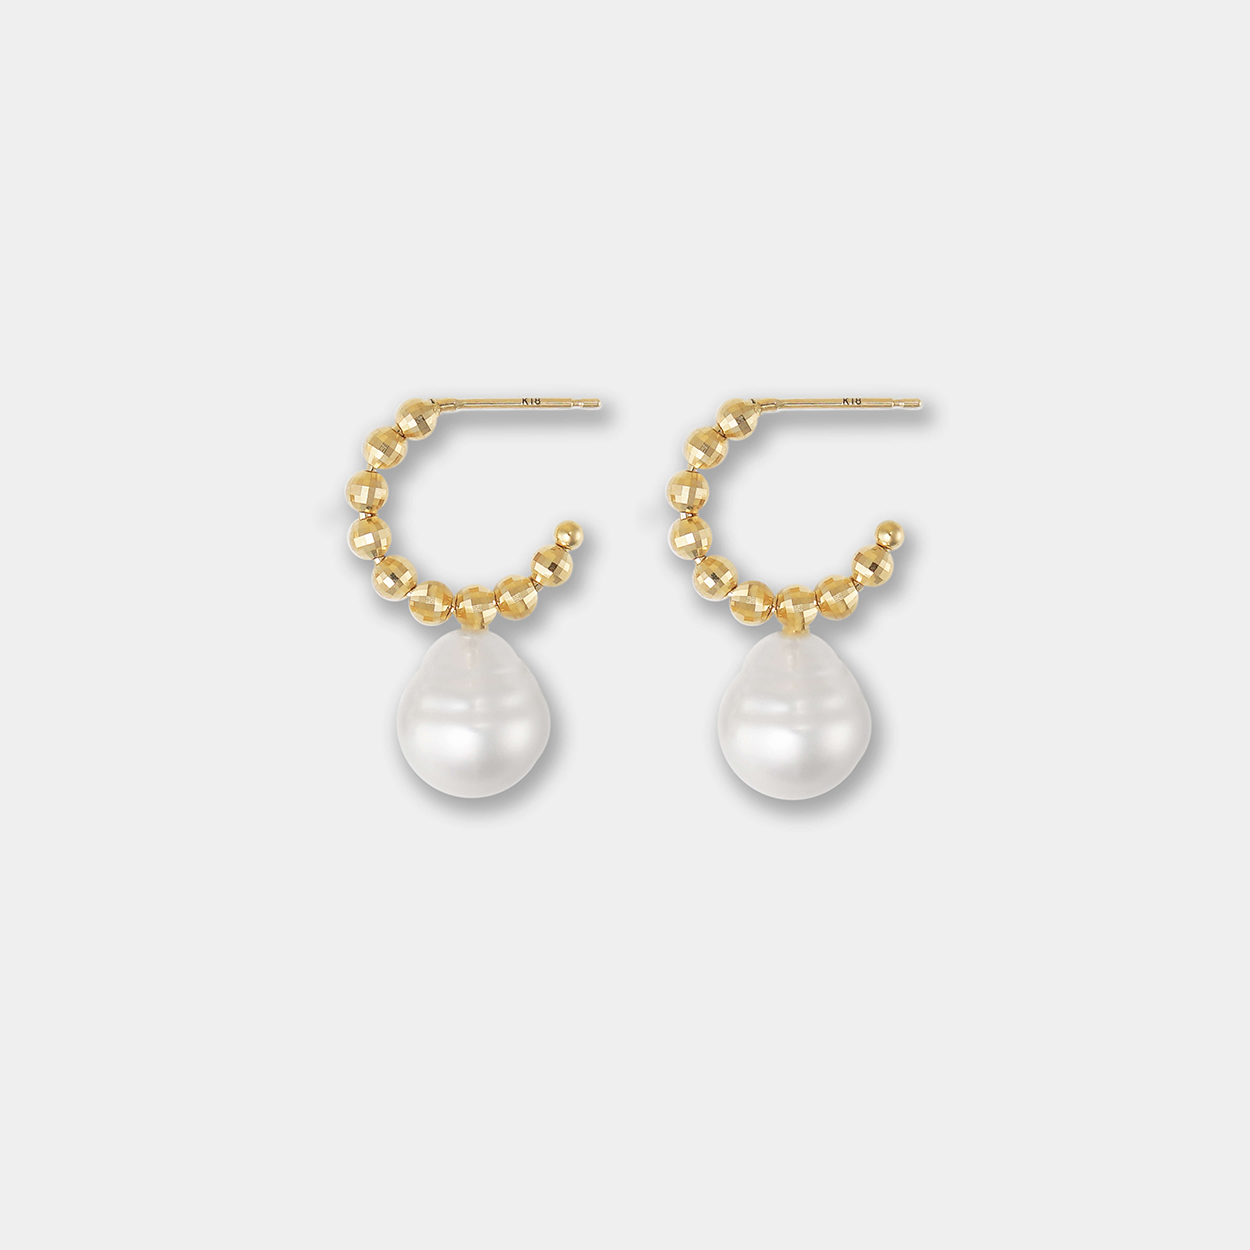 Embrace timeless beauty with these captivating Pearl Dot x Gold Piercing earrings, showcasing a delicate pearl delicately nestled in shimmering gold.